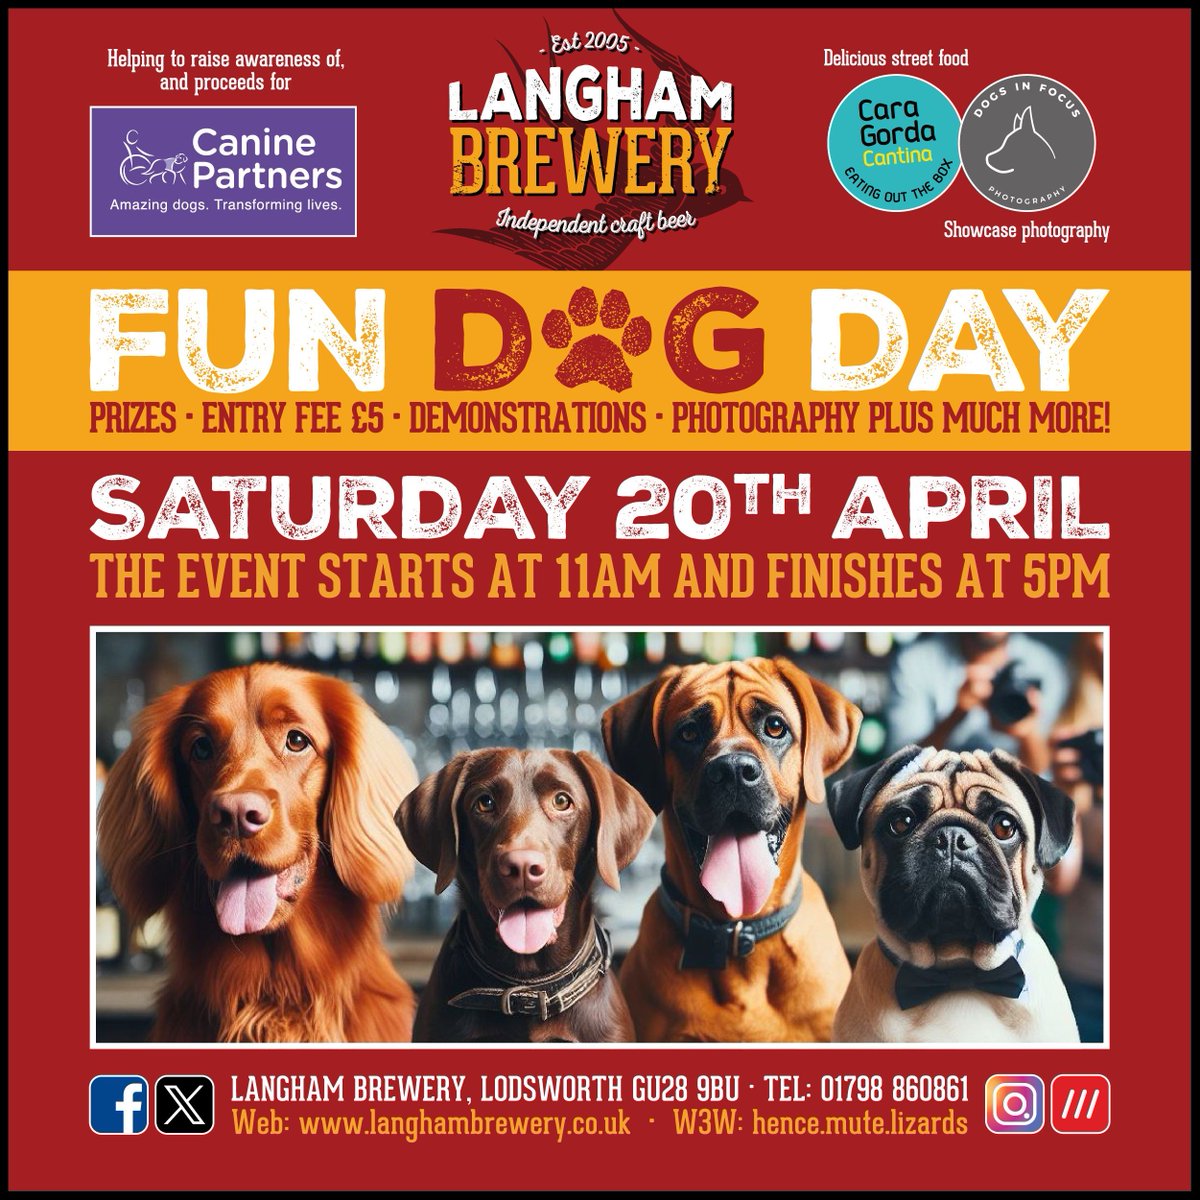 Woof! It's this Saturday! 🐶 Our Fun Dog Day takes place here at the brewery on Saturday 20th April, and we'd love you to join us. We'll be celebrating all things 4 paws and waggy tails with a (very relaxed) Fun Dog Day in support of Canine Partners @canine_partners